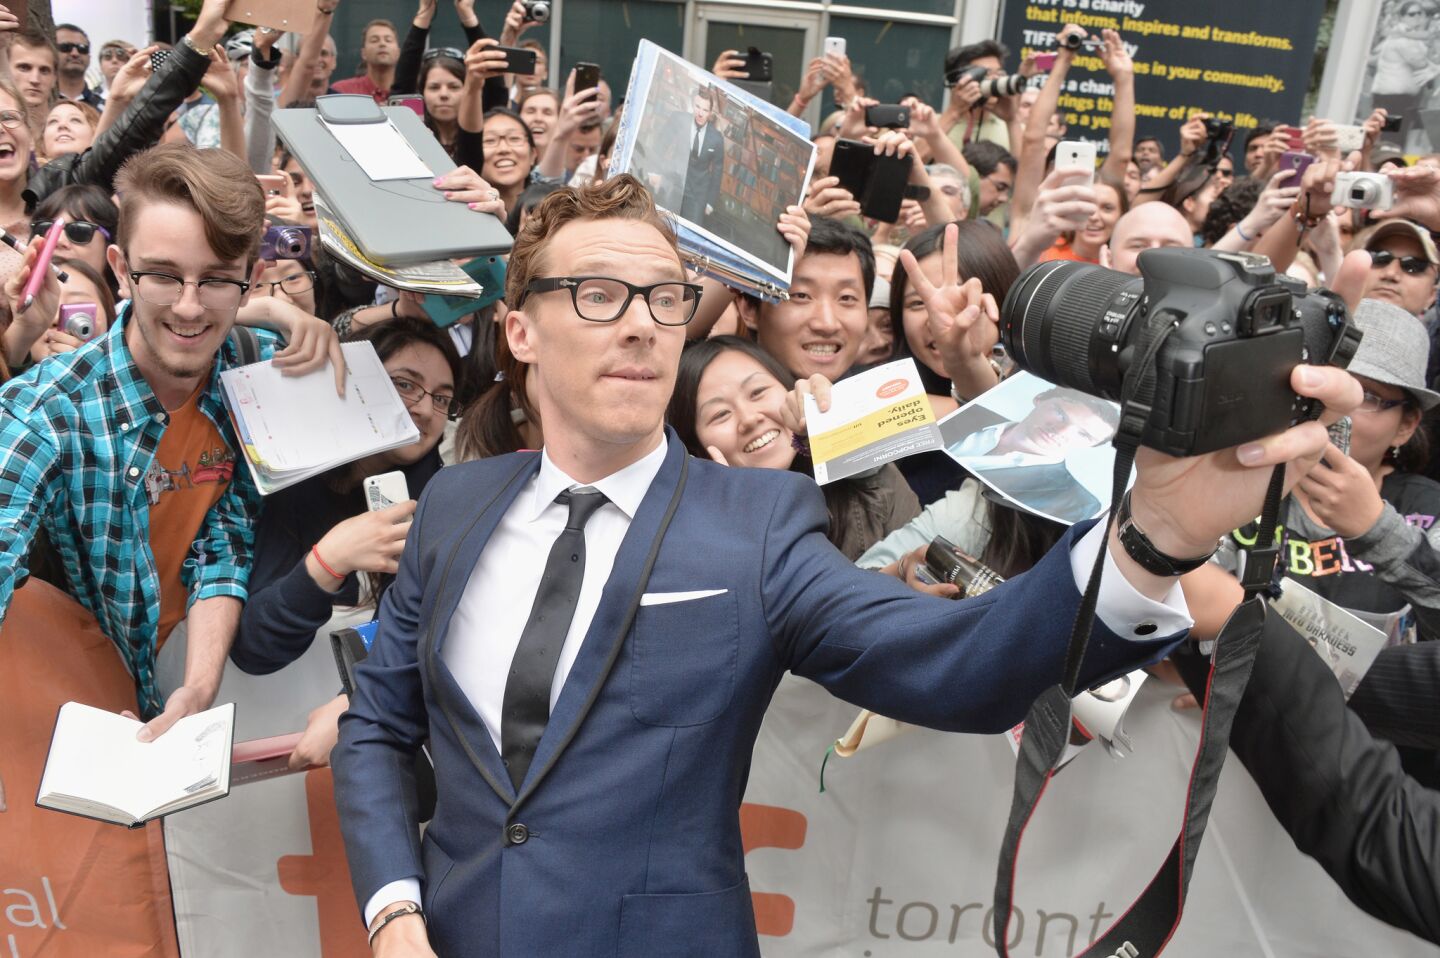 Cumberbatch, who has developed a fervent following, takes a selfie with fans at "The Imitation Game" premiere on Sept. 9, 2014.